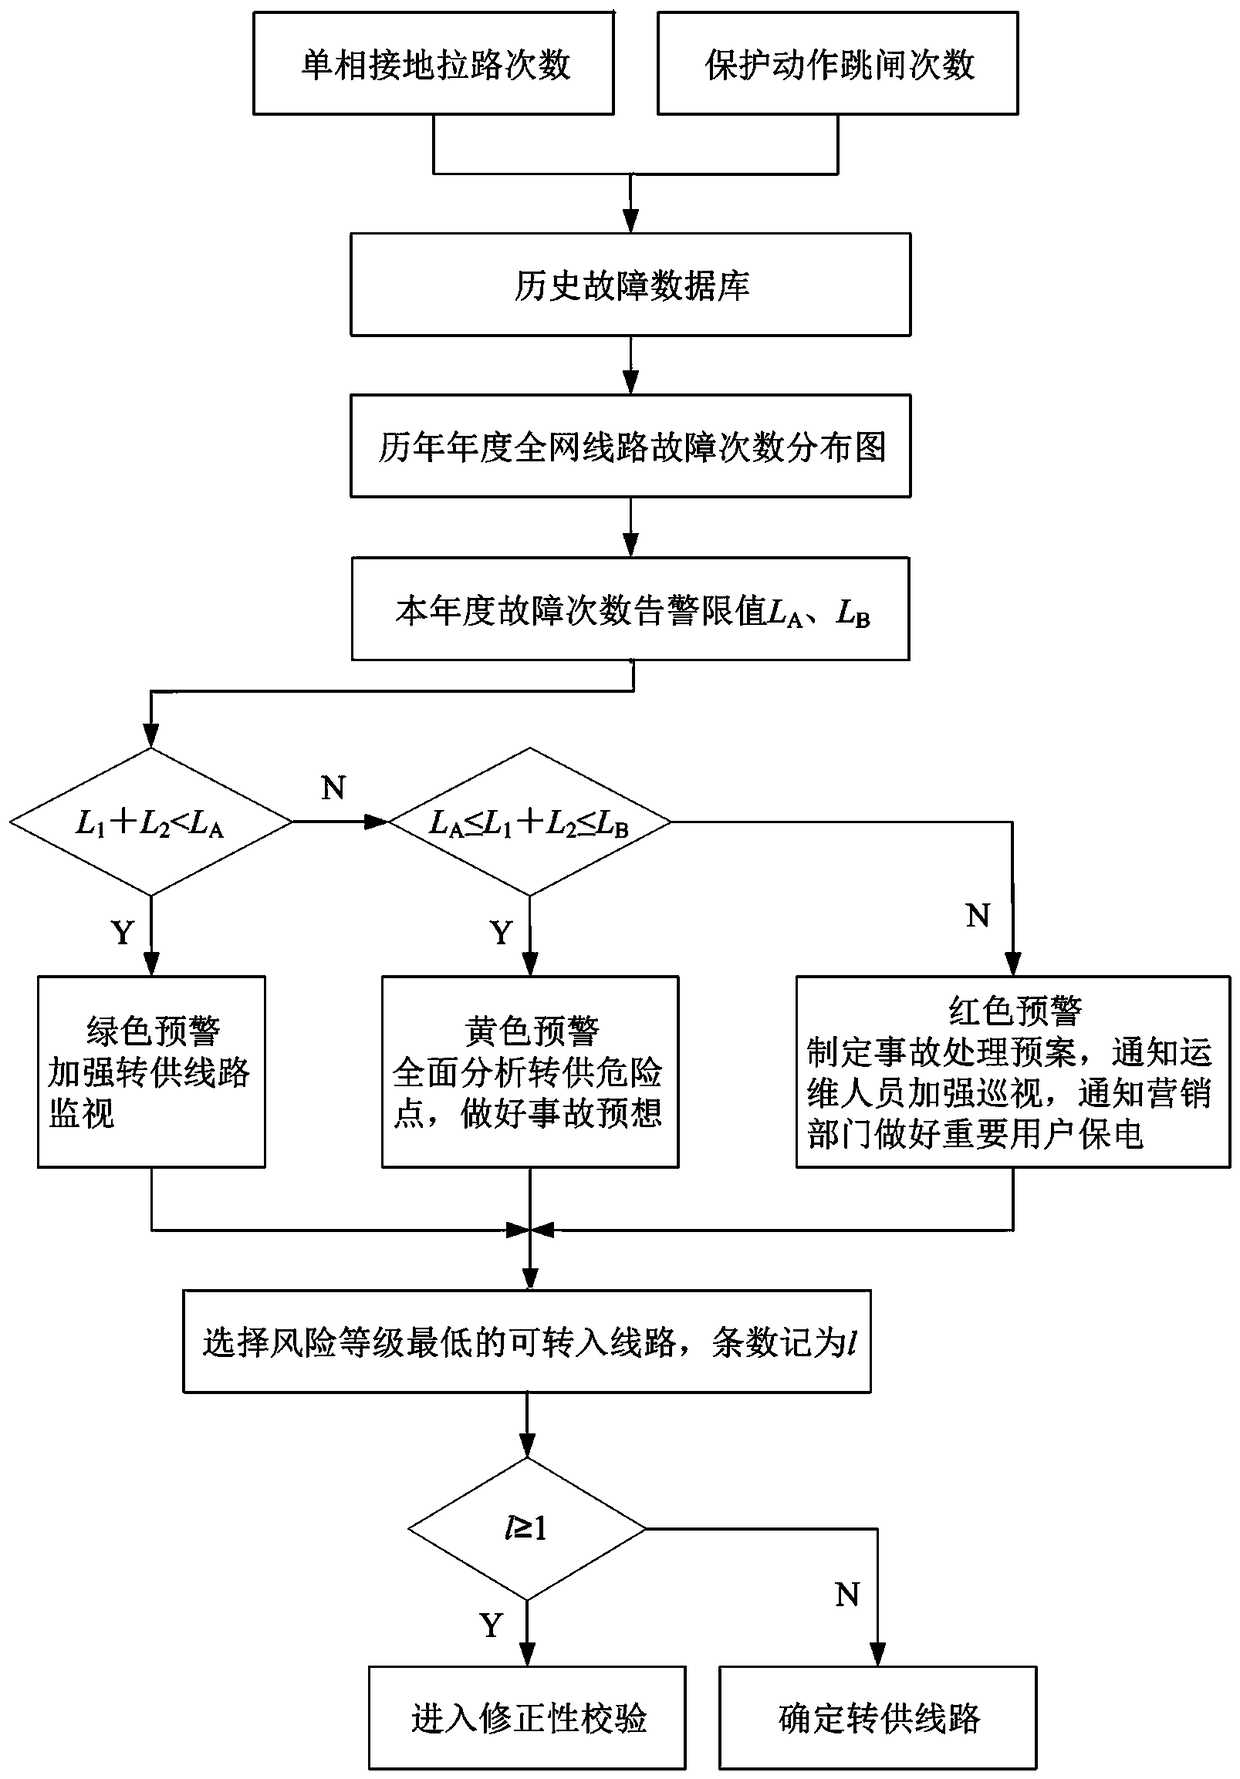 Method for assisted decision-making and analysis of distribution network load transfer